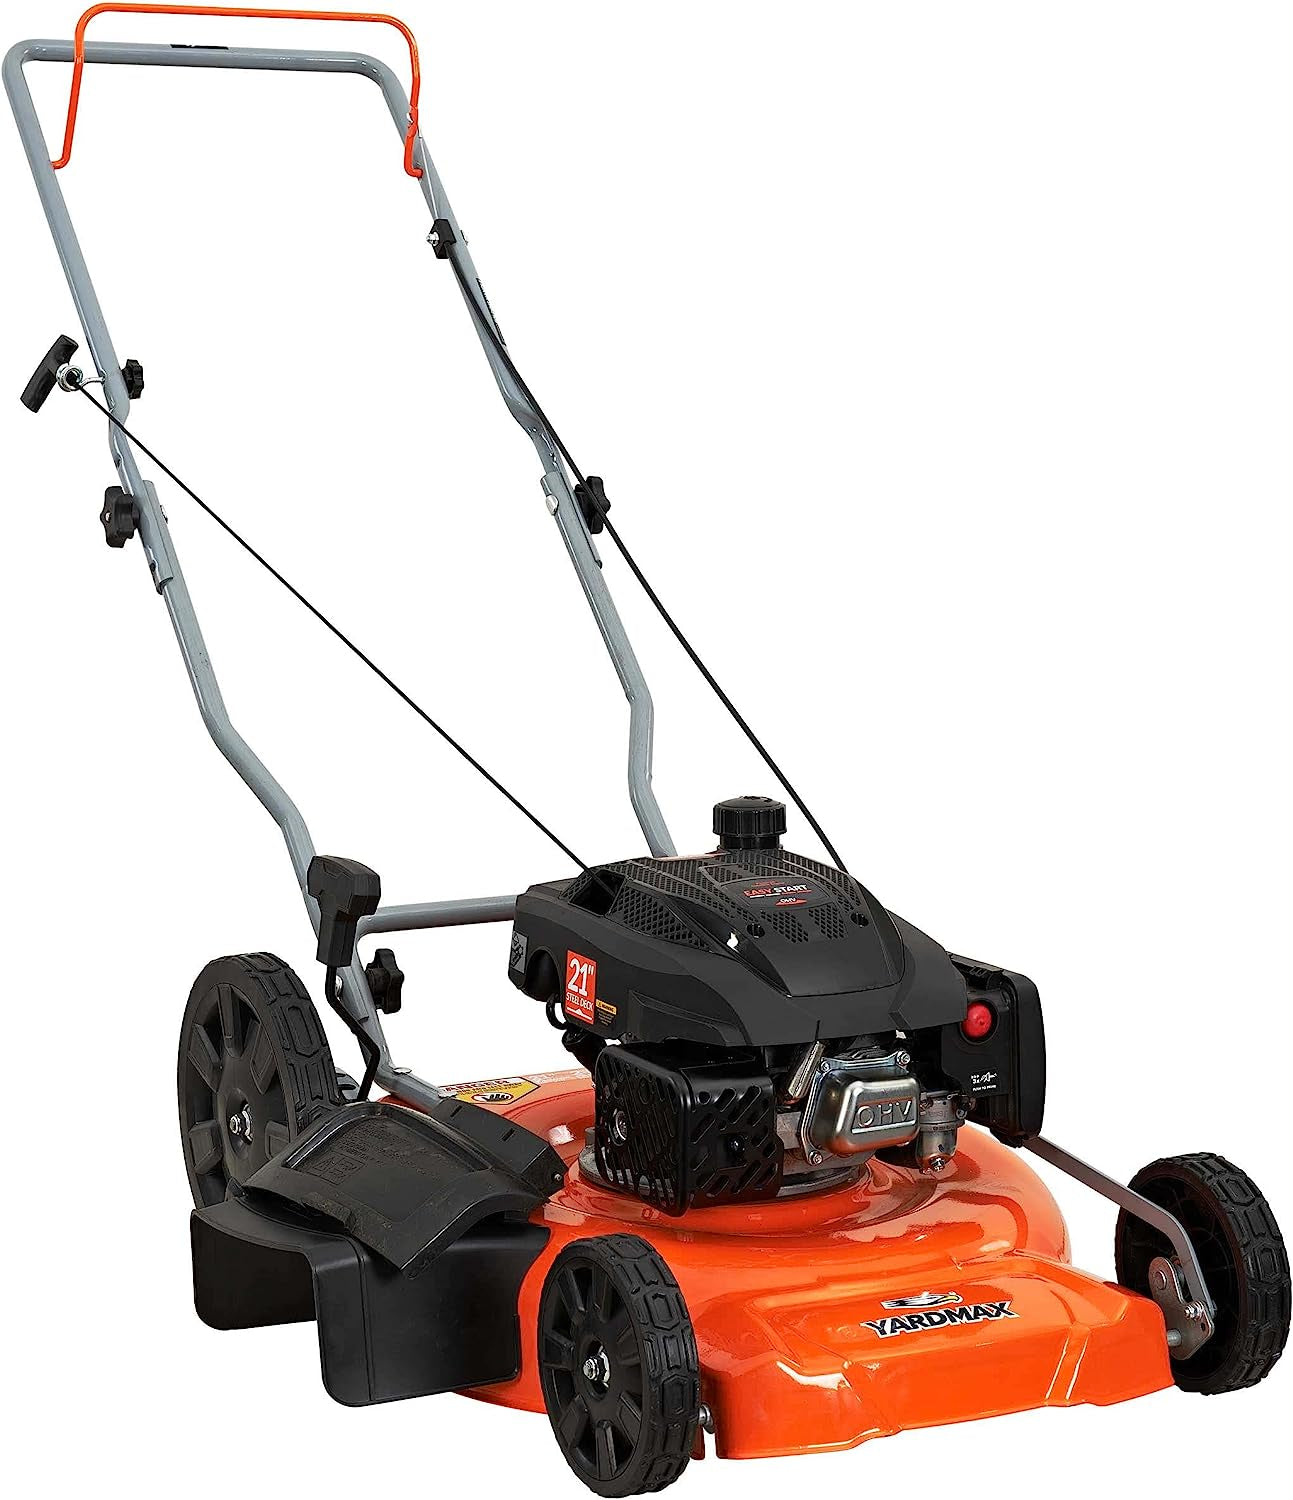 Offer For 21 In. 170Cc 2-In-1 Gas Walk behind Push Lawn Mower with High Rear Wheels MowerShop